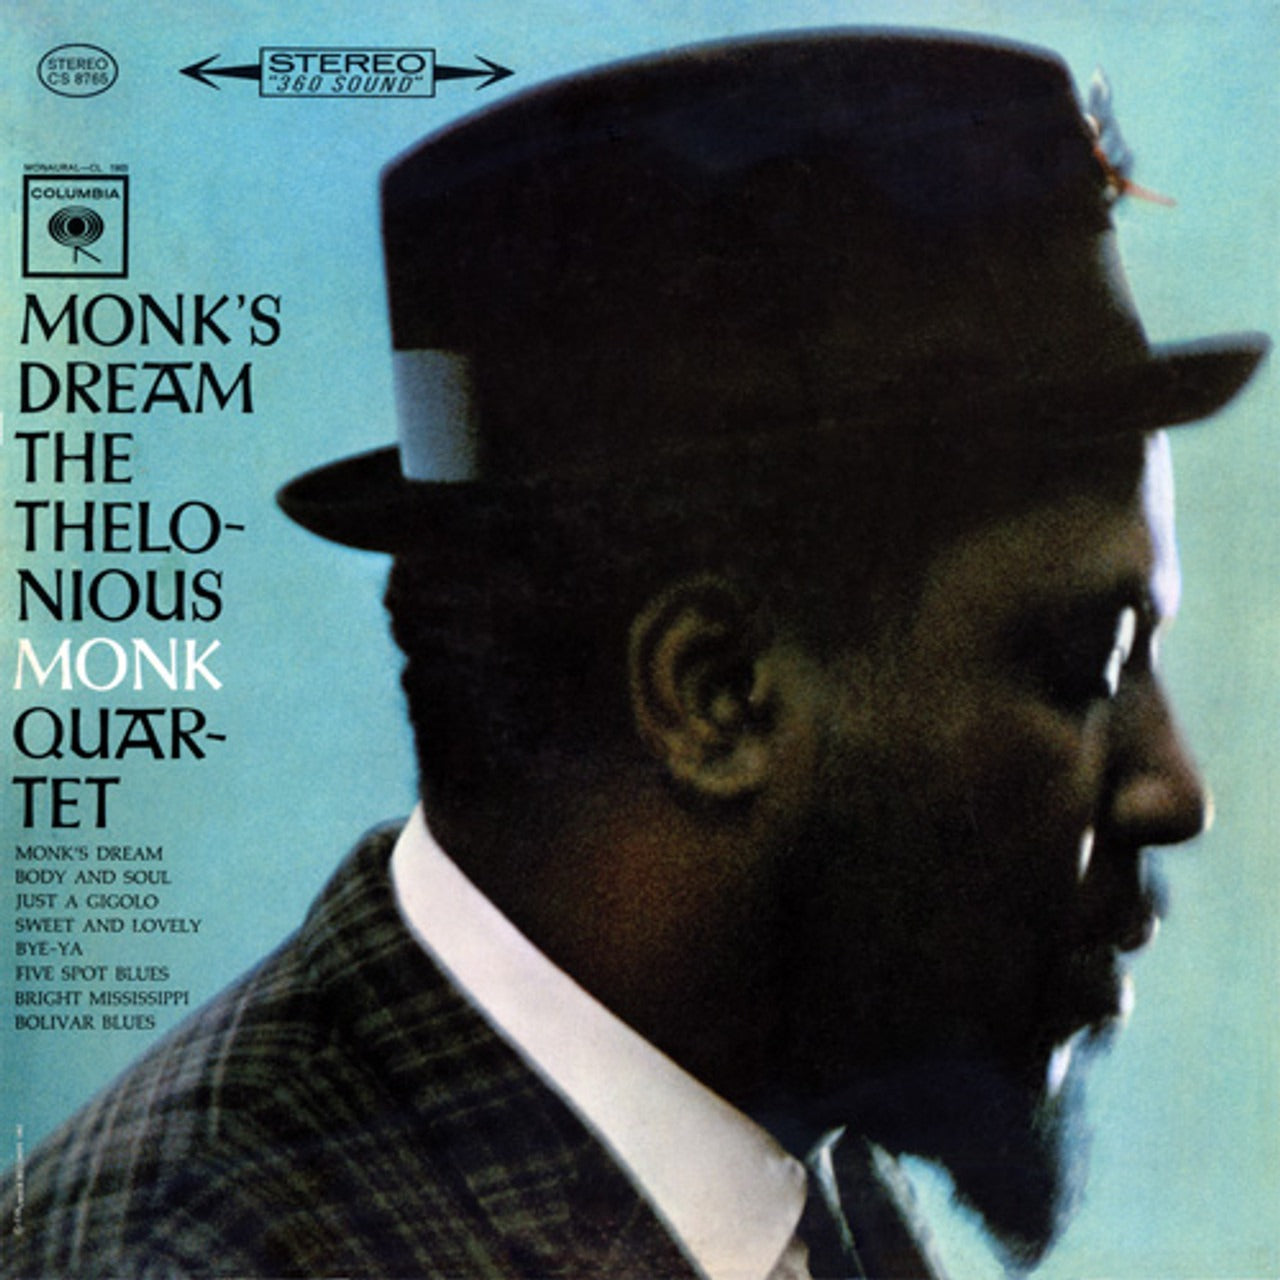 The Thelonious Monk Quartet - Monk's Dream LP (Impex Reissue, 180g, Pressed at RTI, Remastered by Kevin Gray)